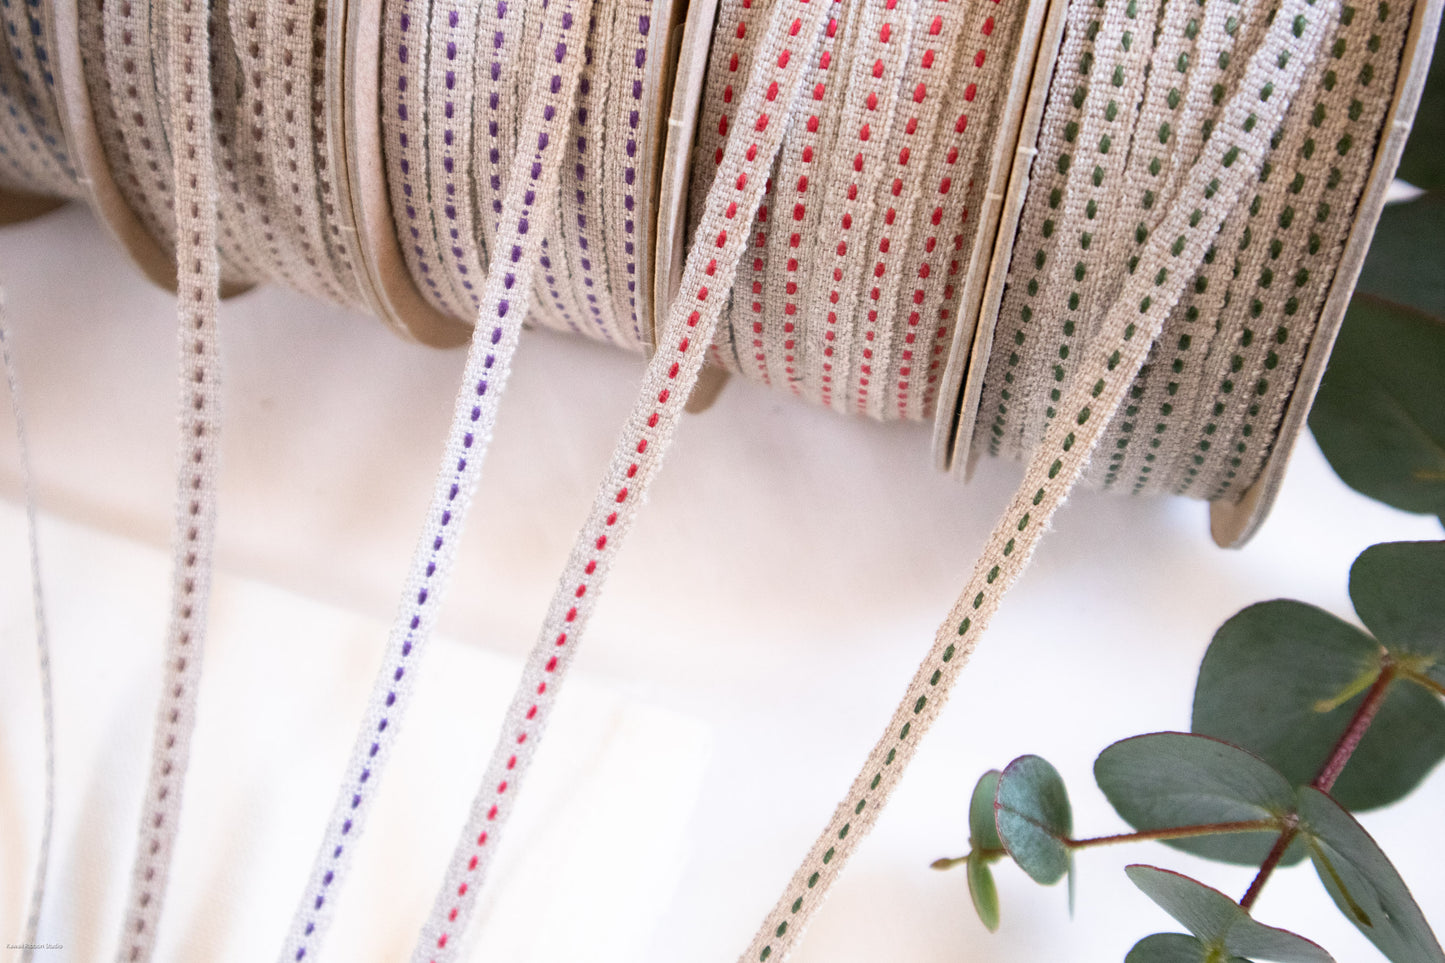 5mm Stitched ribbon/ tape in 100% washed linen